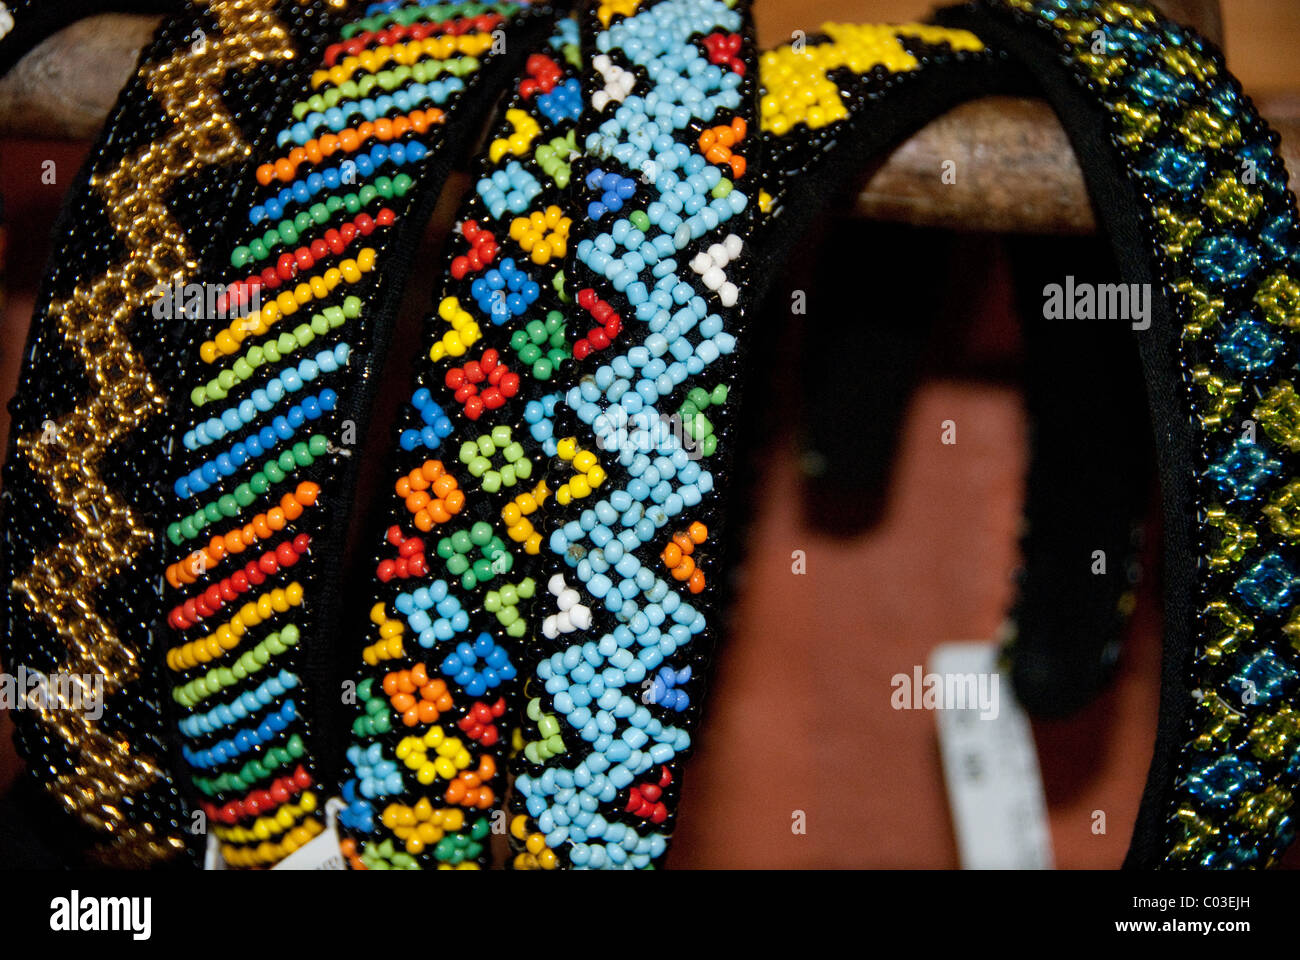 South Africa, Durban, Valley of the Thousand Hills, Phezulu Park. Traditional Zulu cultural park. Typical beaded crafts. Stock Photo